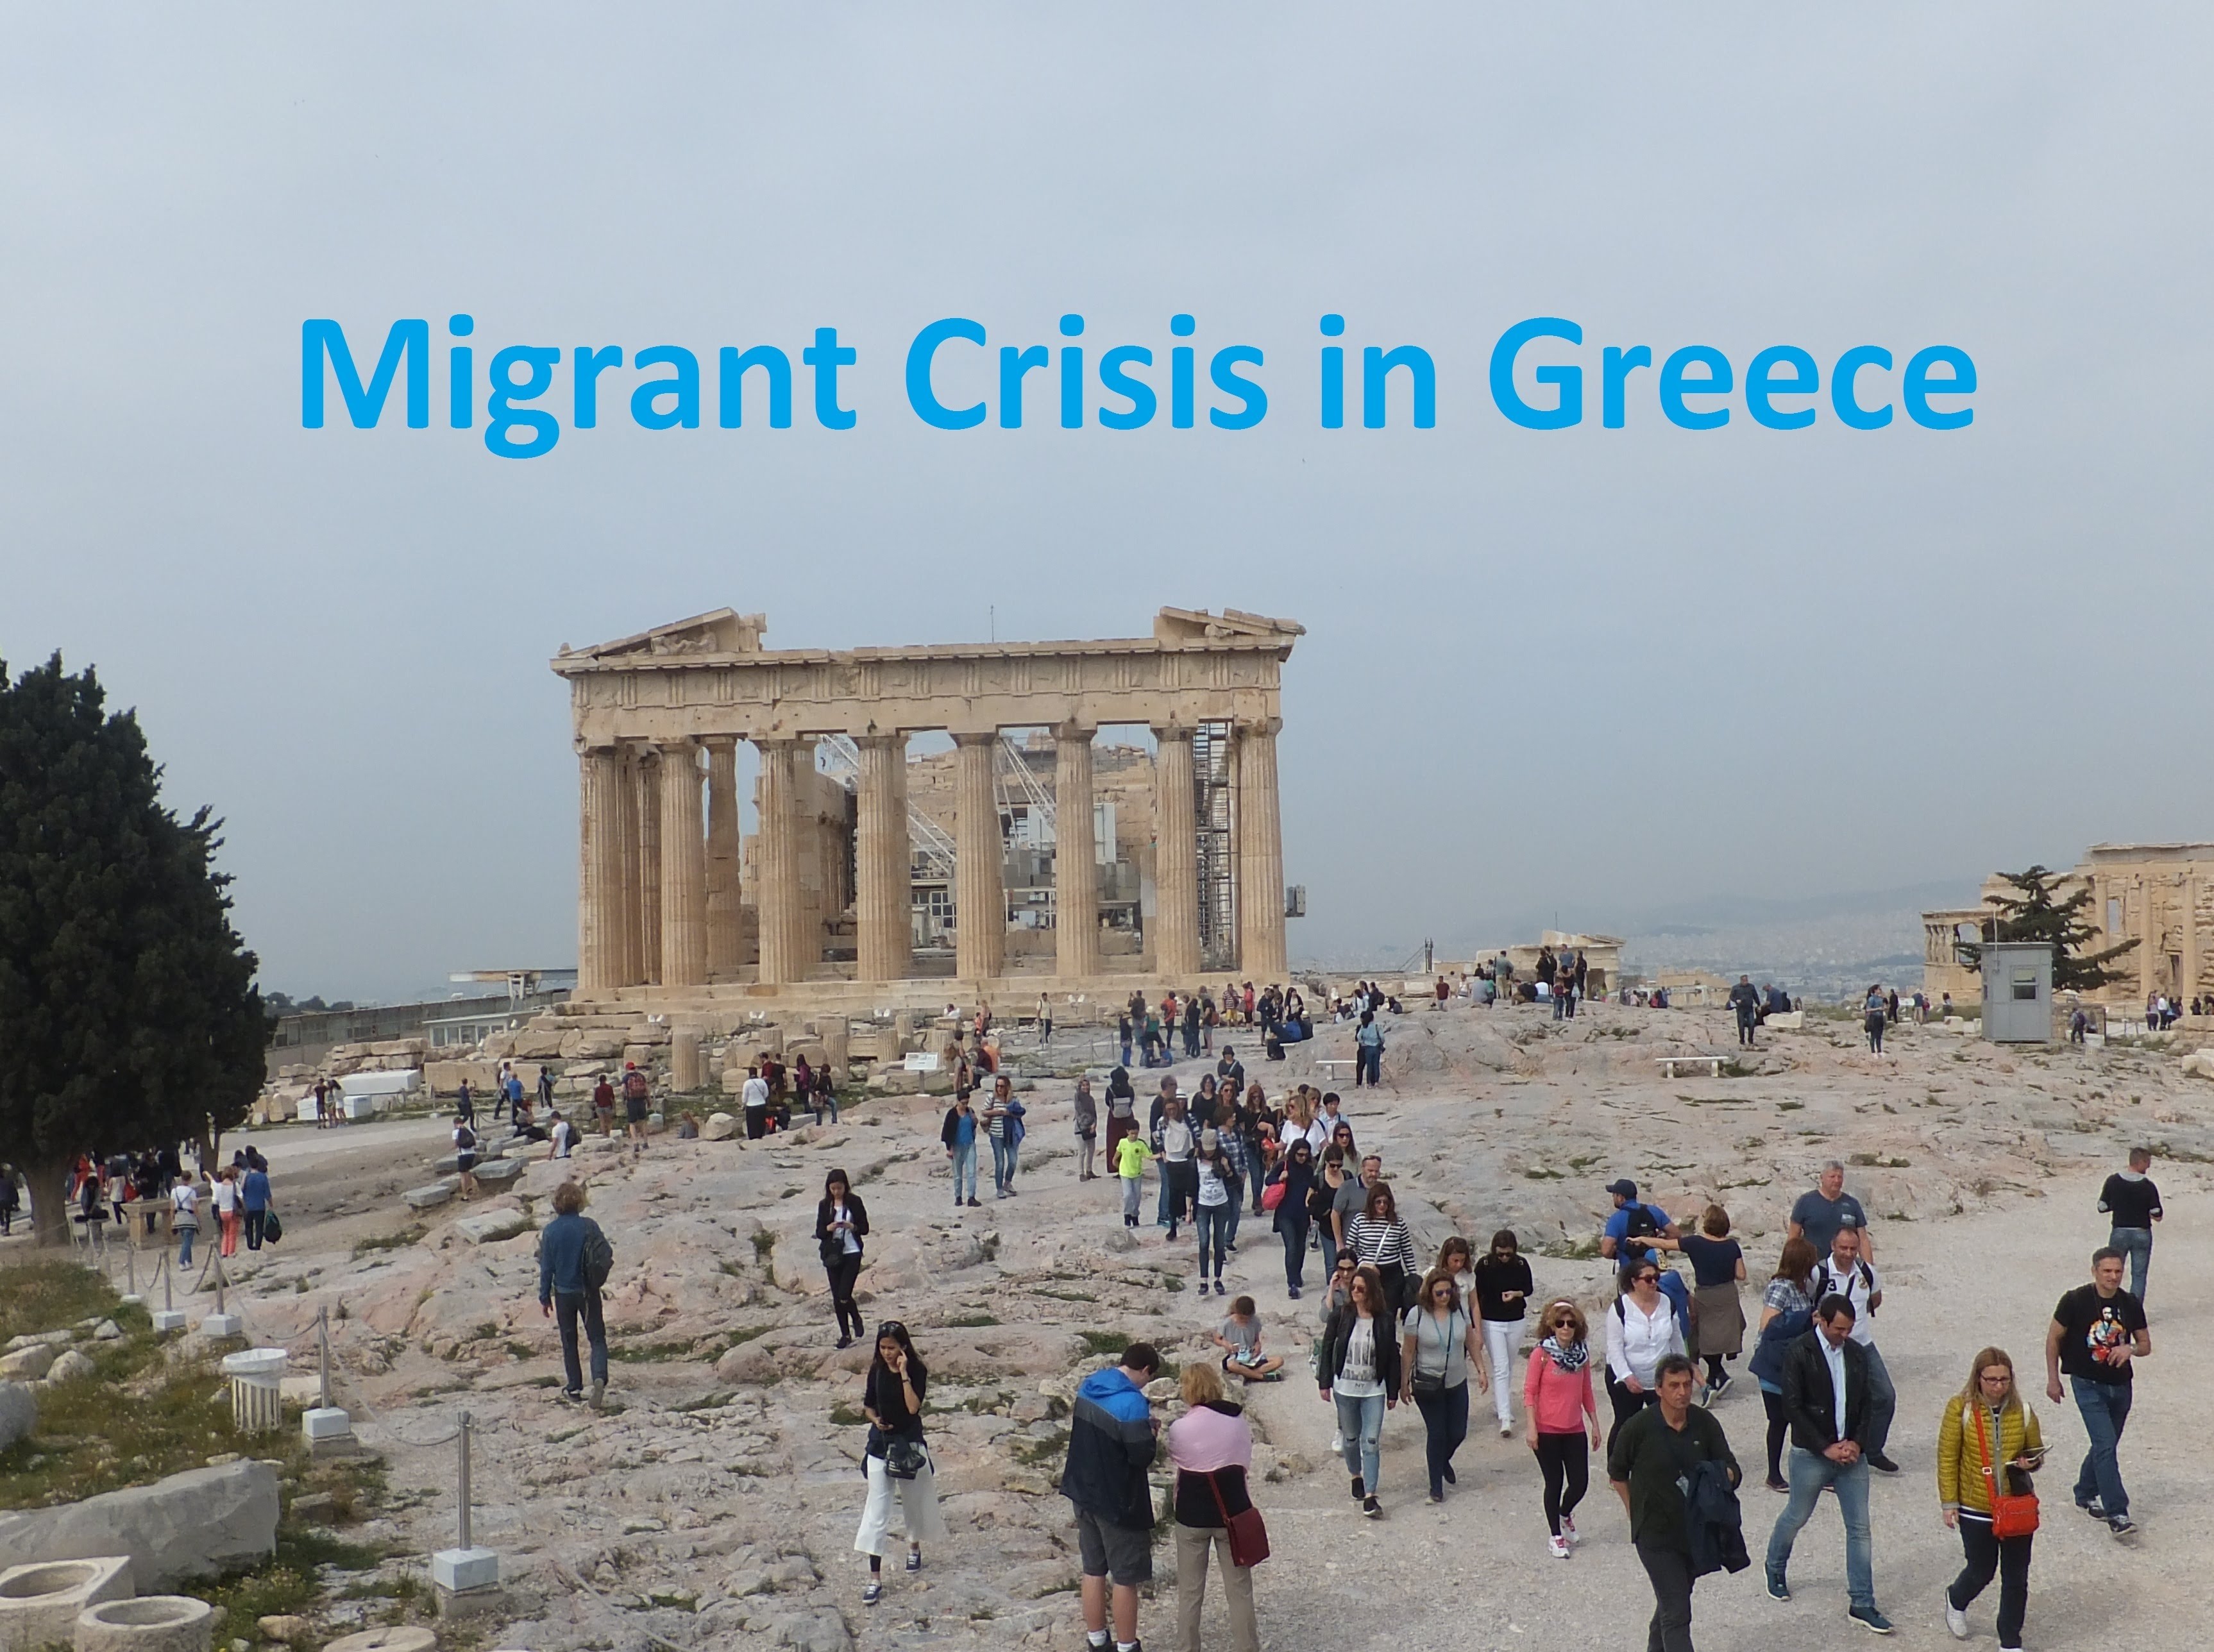 2016 Documentary | Migrant Crisis in Greece: How the refugees are impacting Greek society [HD]